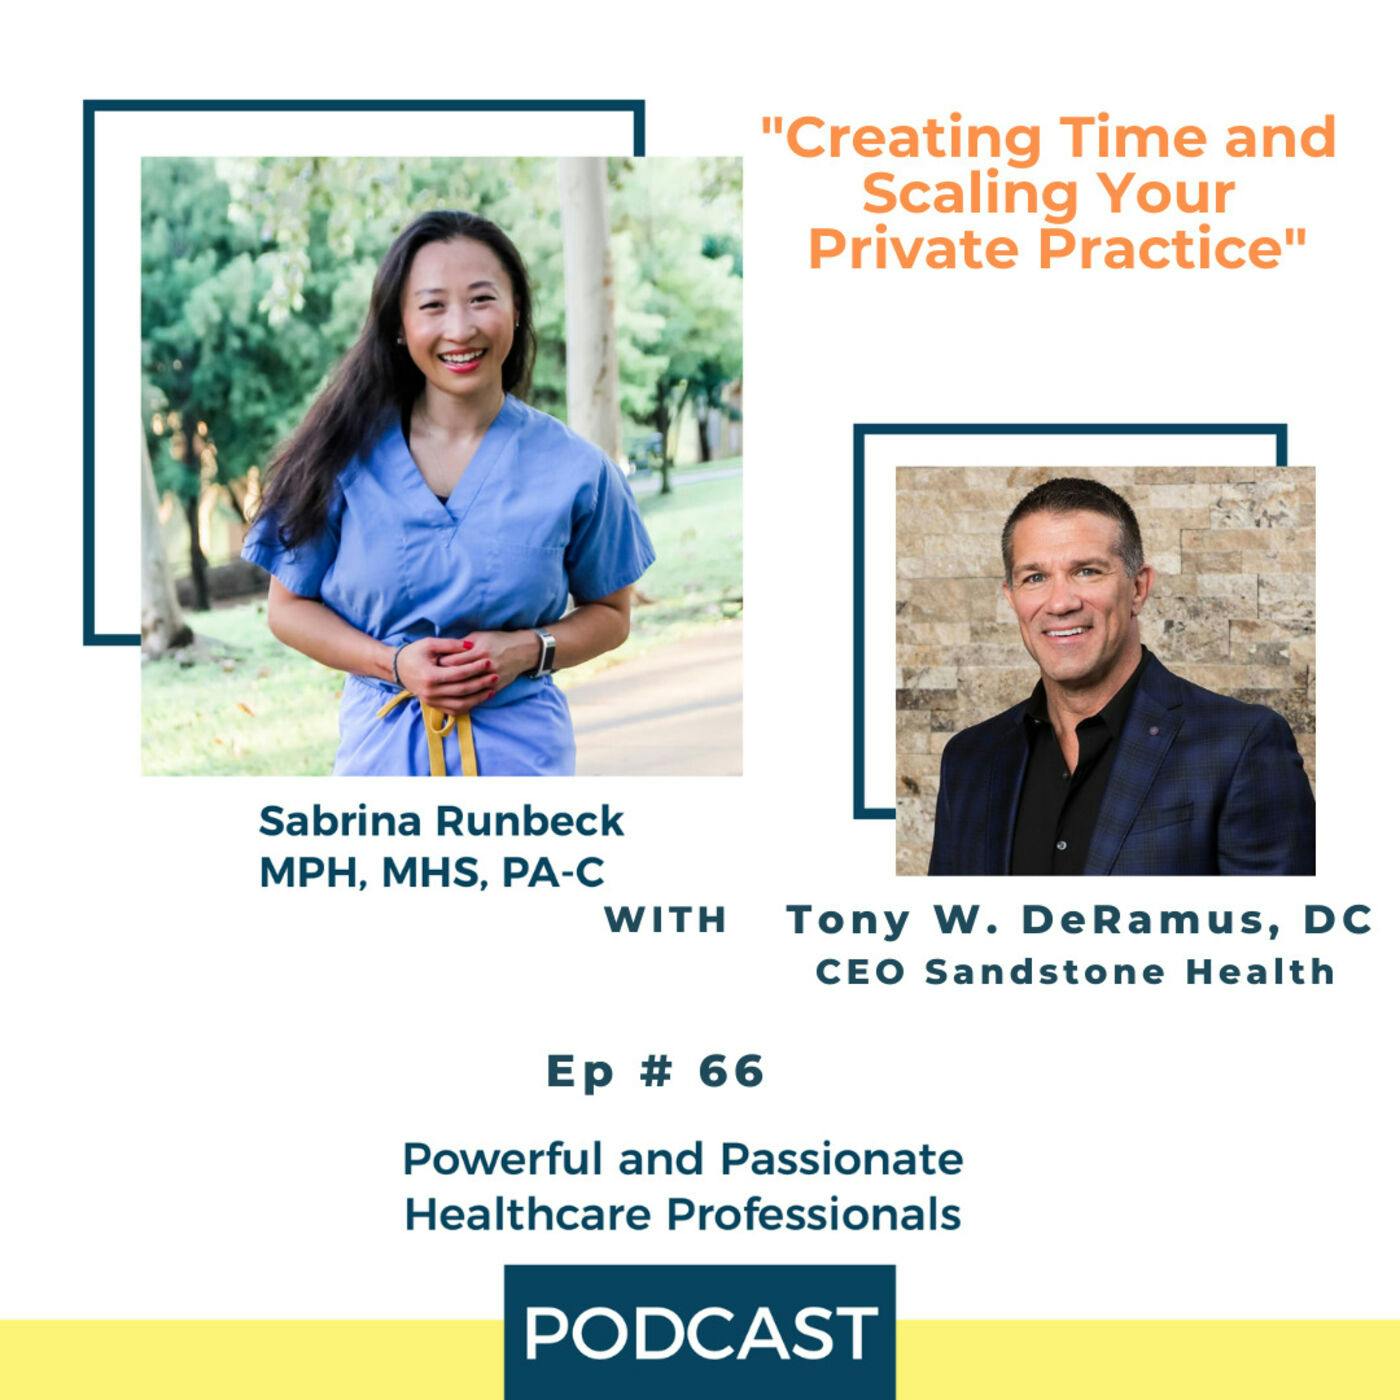 Ep 66 – How to Gain Time Back and Scale Your Private Practice with Dr. Tony DeRamus